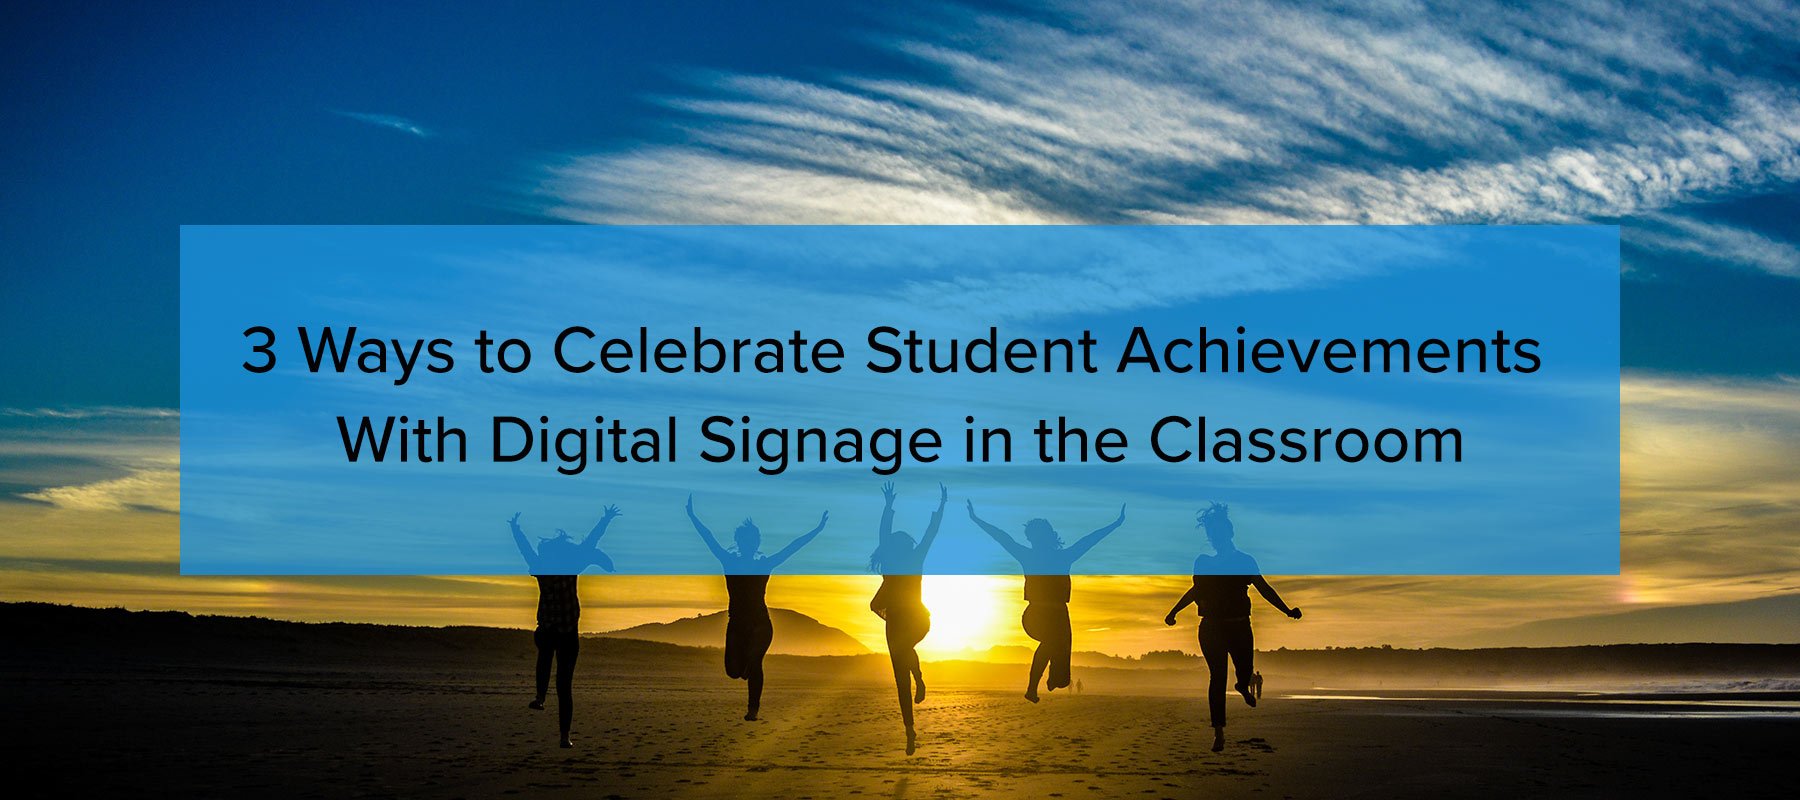 3 Ways to Celebrate Student Achievements With Digital Signage in the Classroom